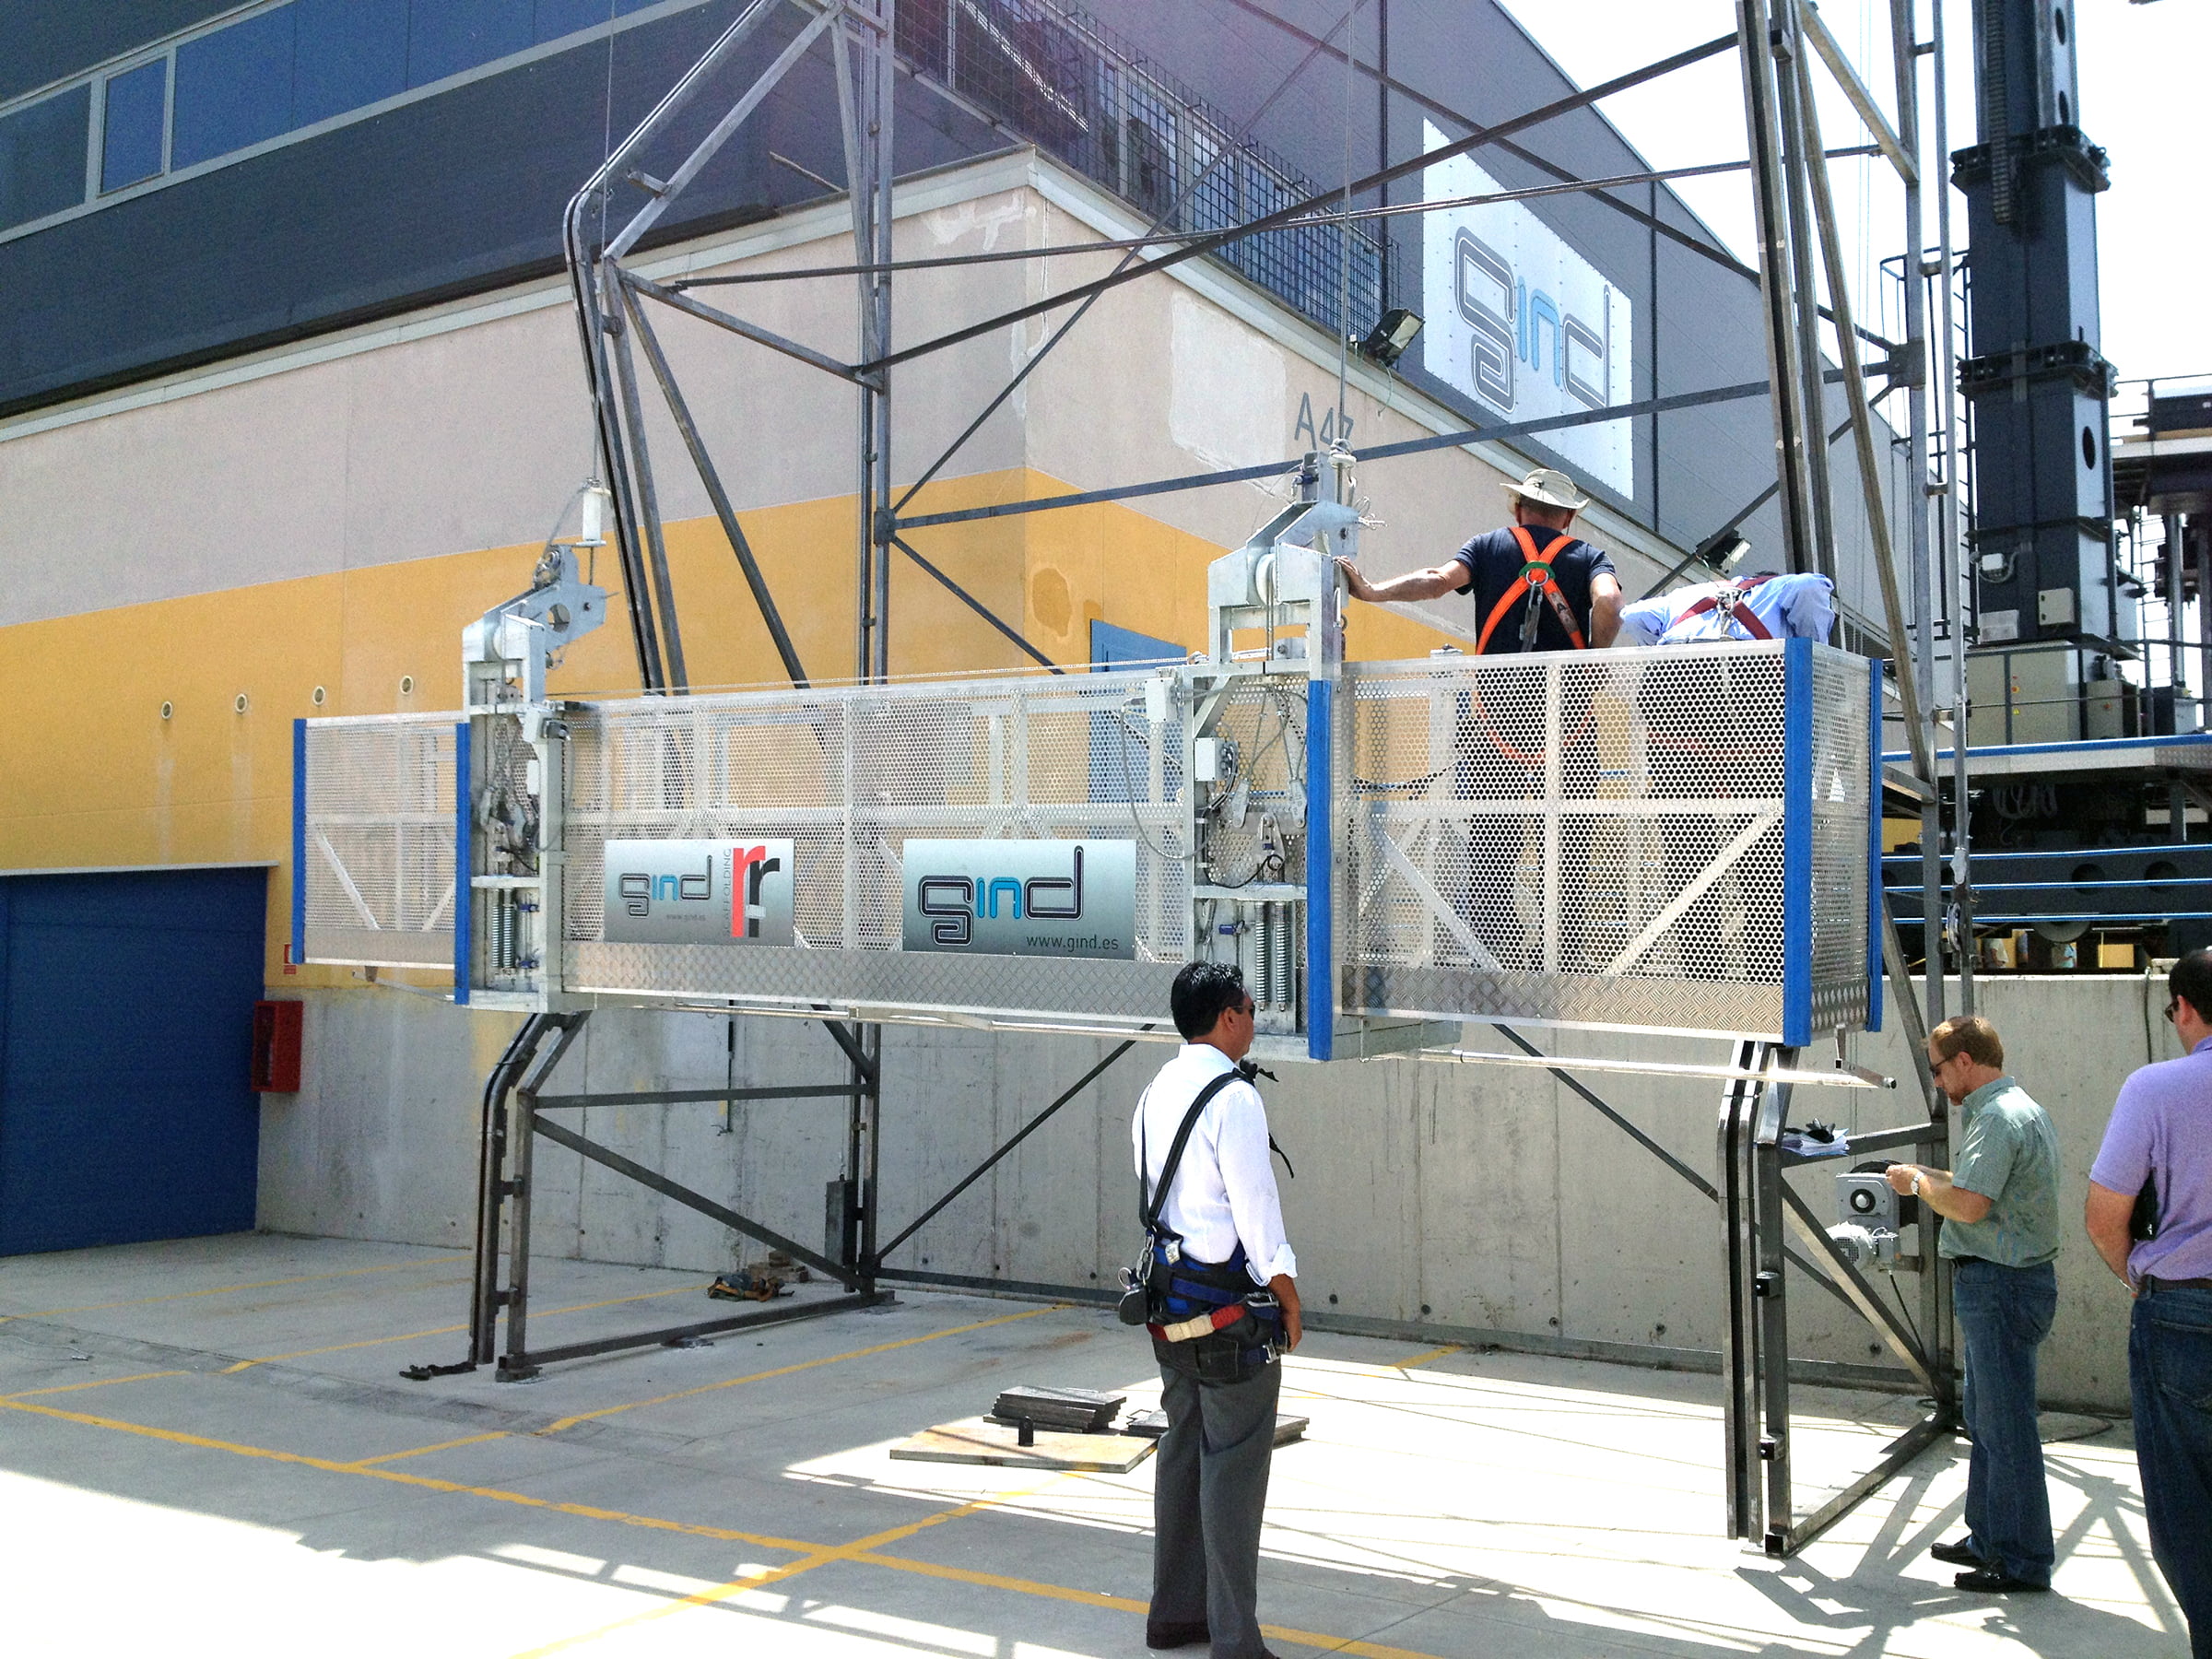 An image of the full-scale testing of the window washing system.